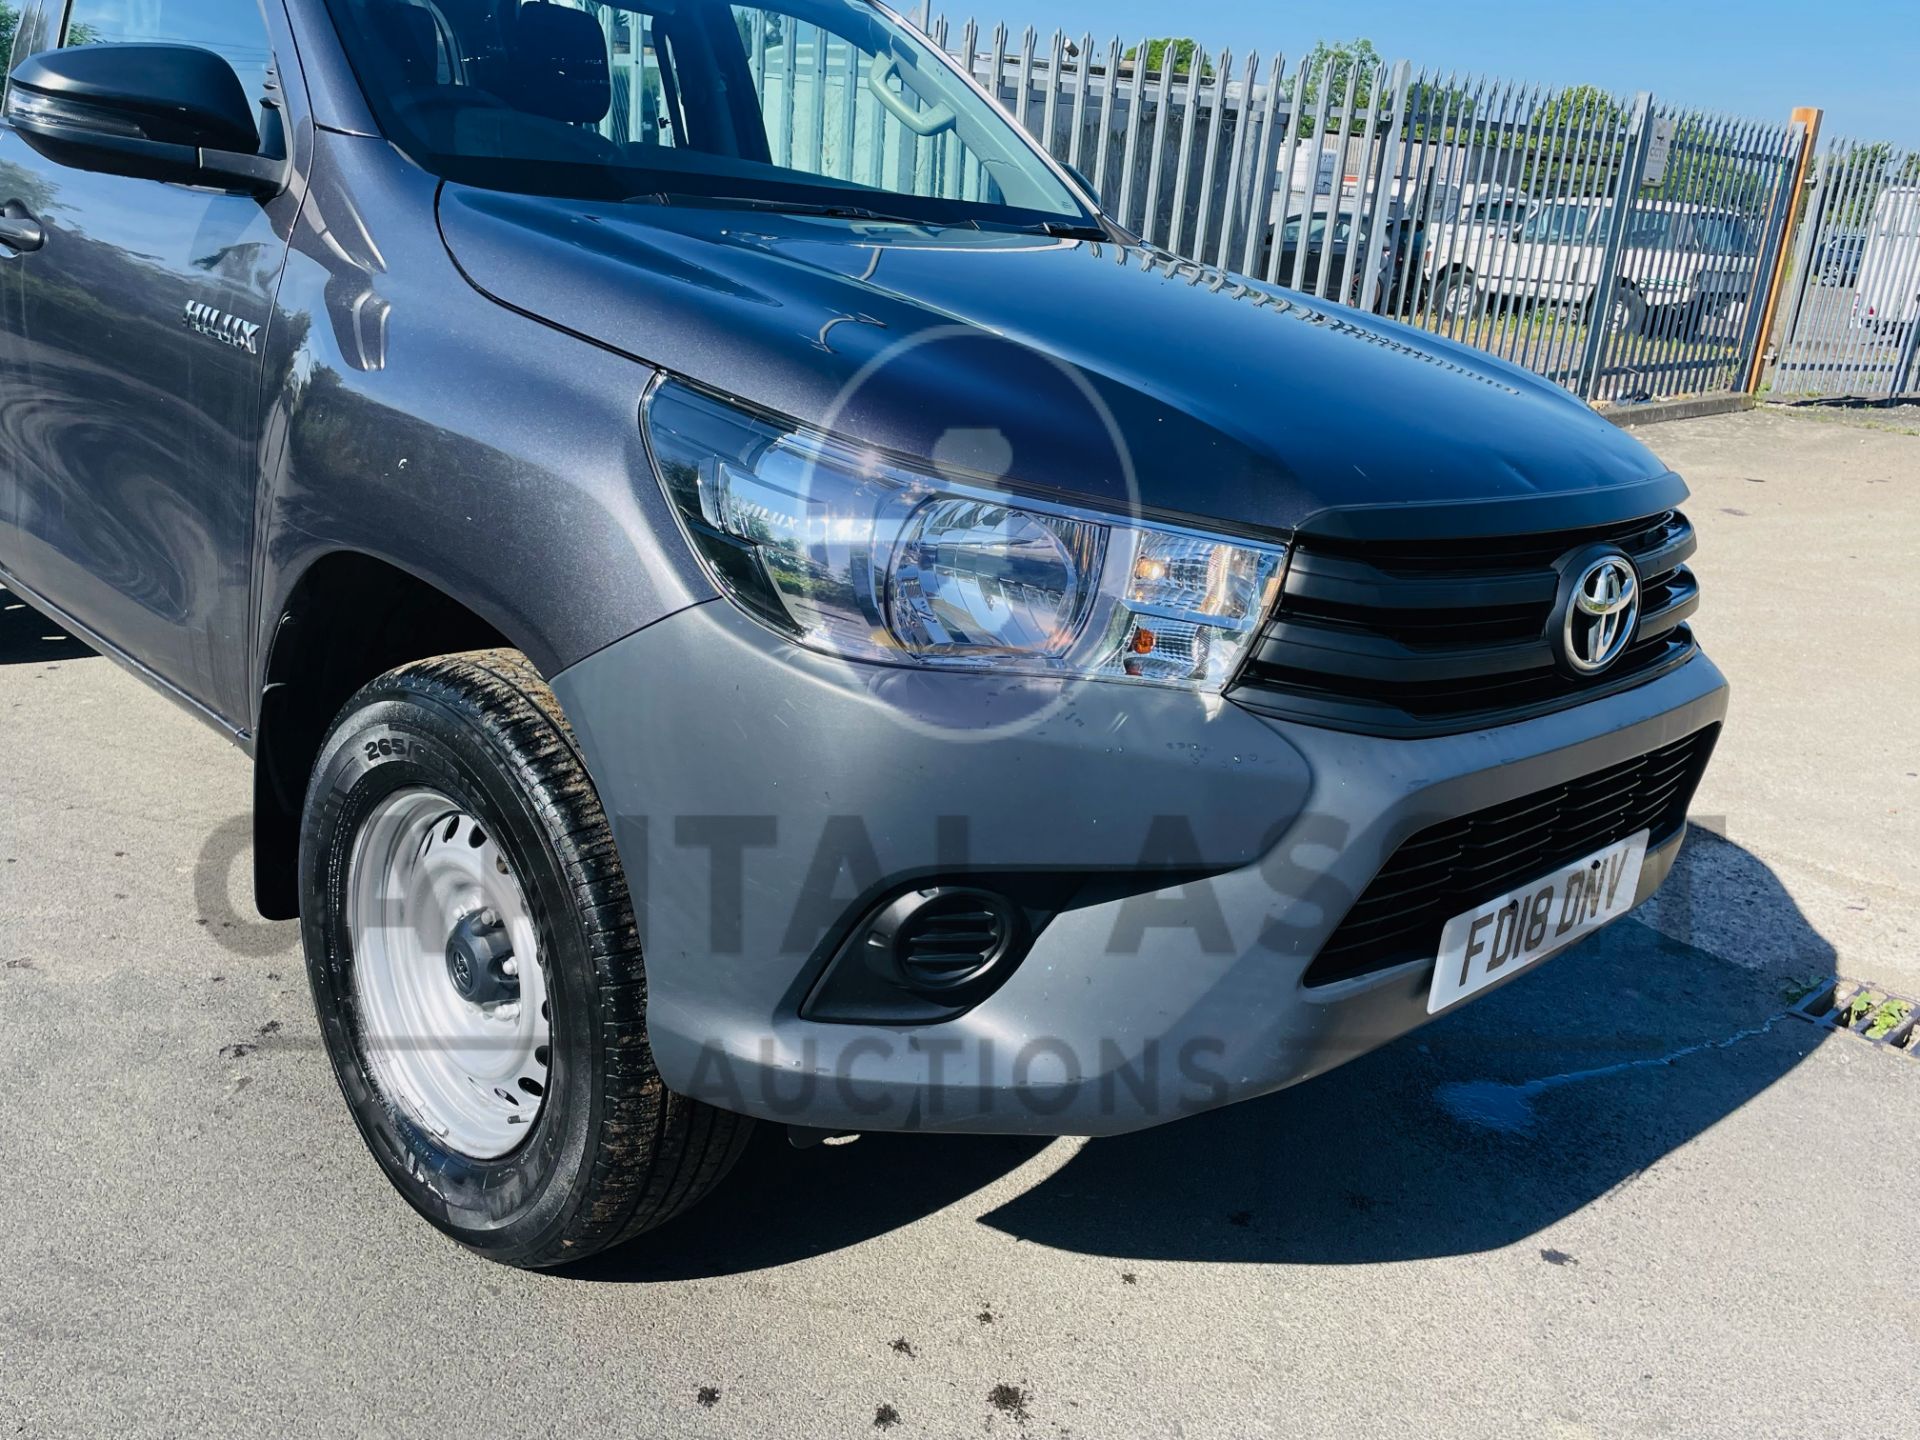 (On Sale) TOYOTA HILUX *DOUBLE CAB PICK-UP* (2018 - EURO 6) 2.4 D-4D - 6 SPEED *ONLY 52,000 MILES* - Image 15 of 43